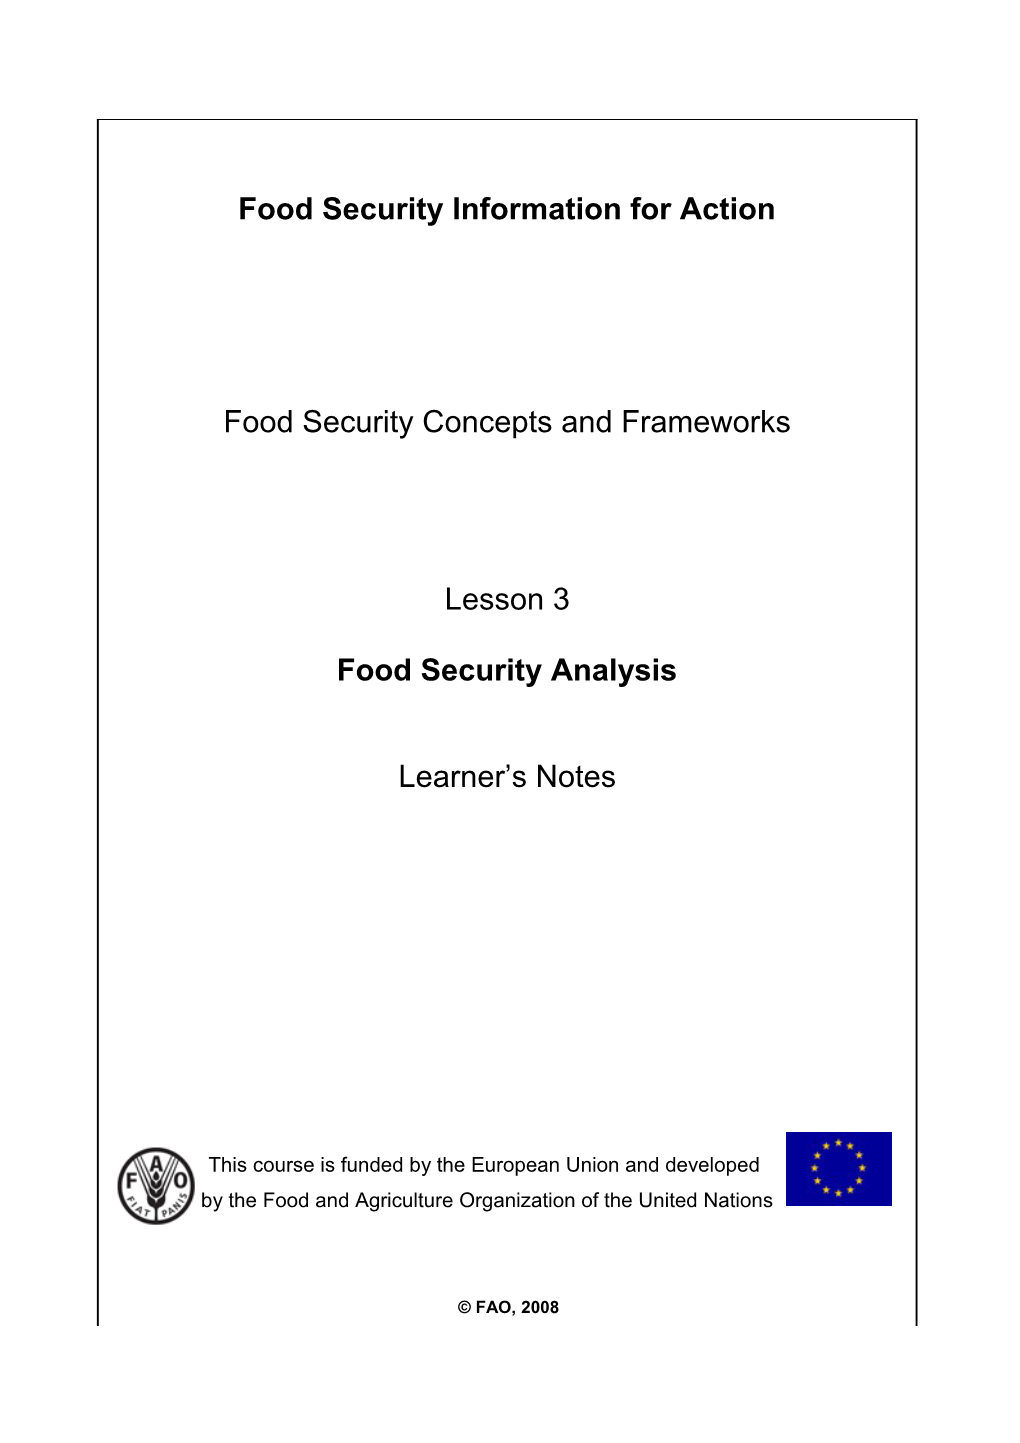 Course - Food Security Concepts and Frameworks